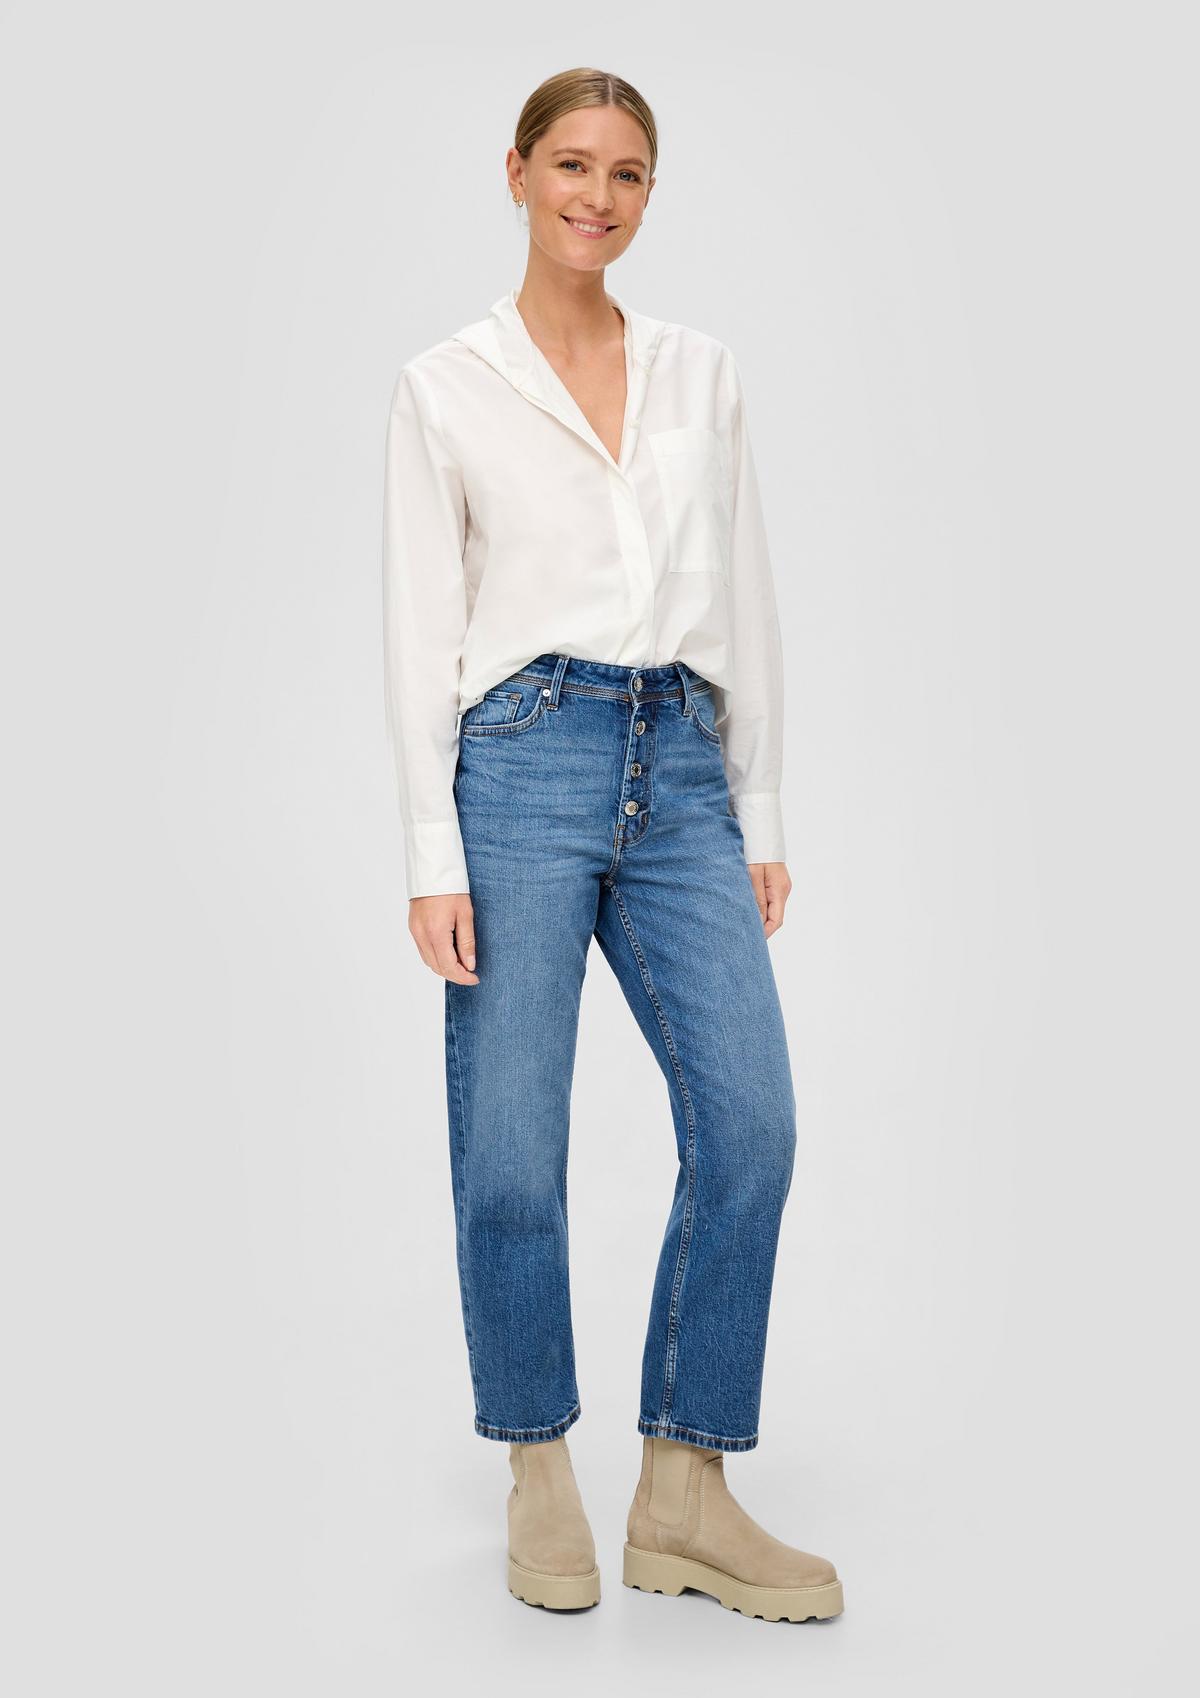 Regular: jeans with a straight leg